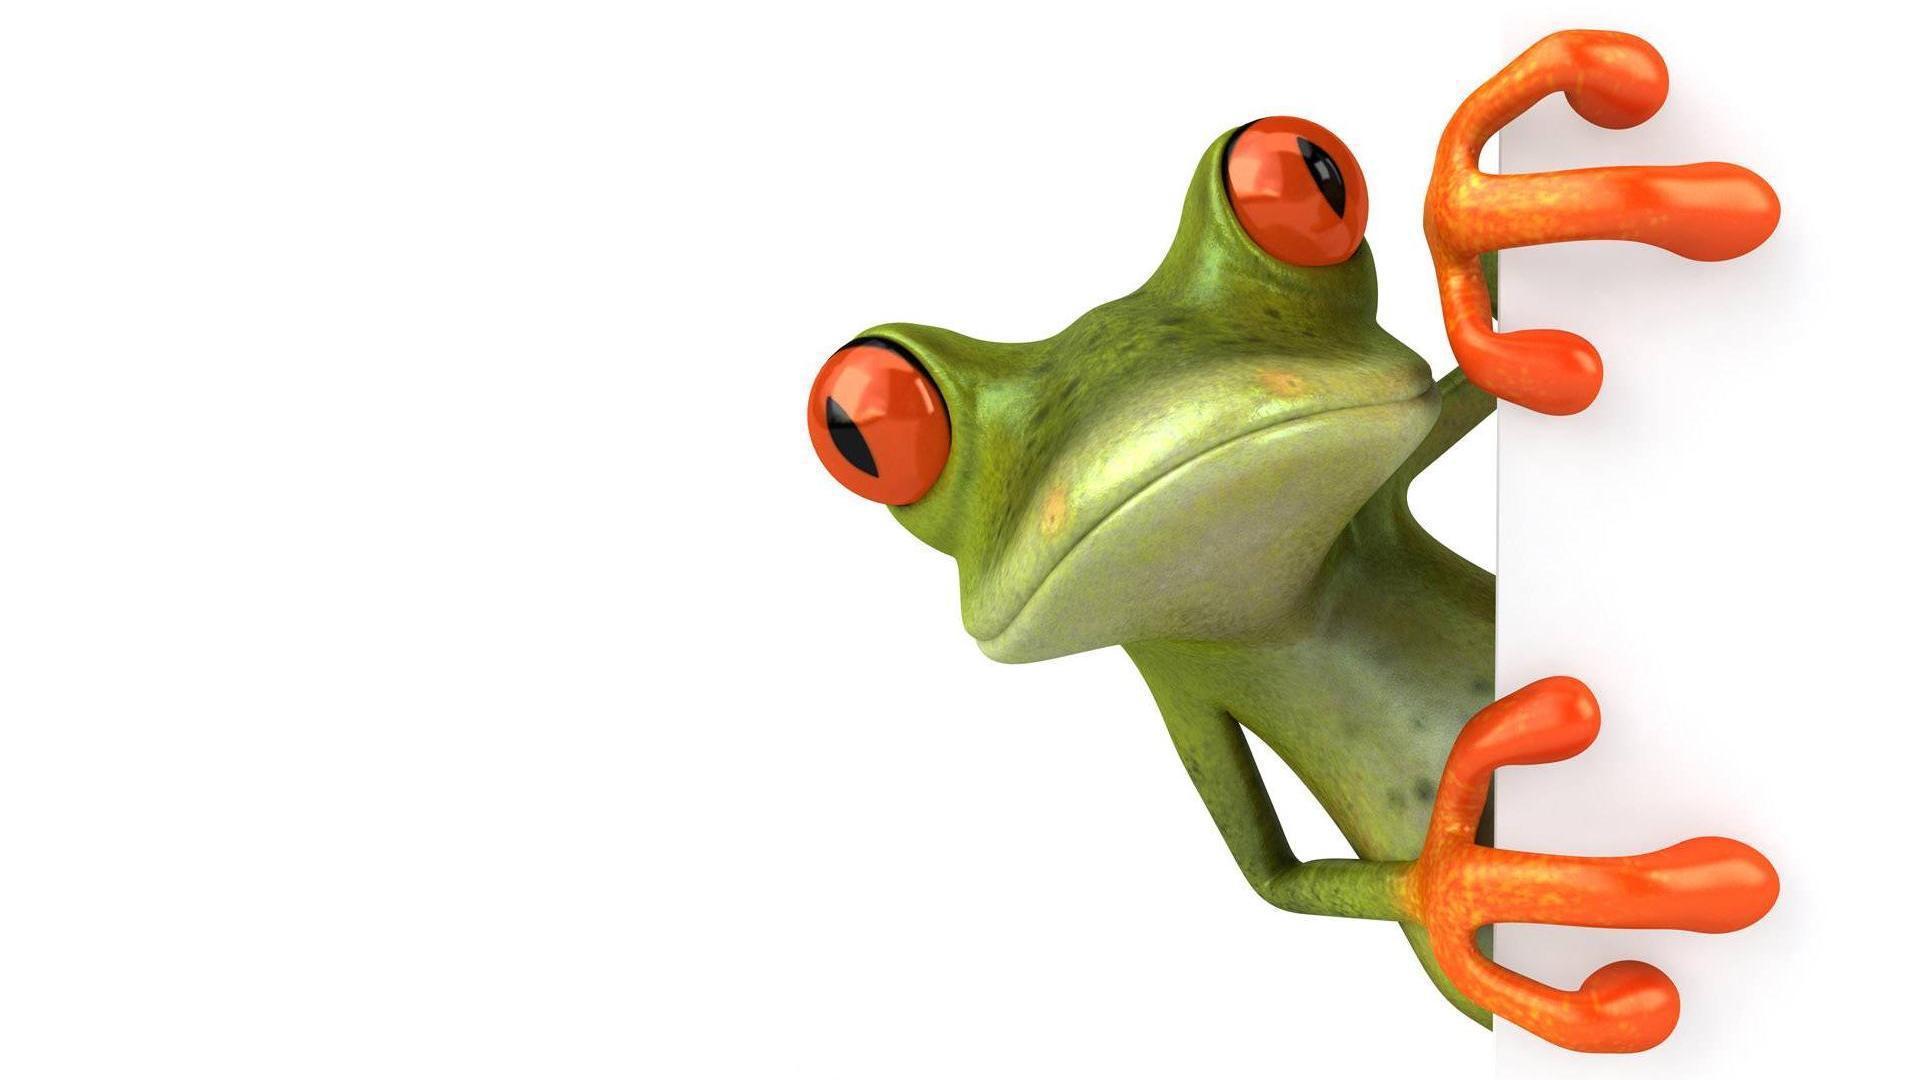 Frog Funny Free Cliparts That You Can Download To You Computer And